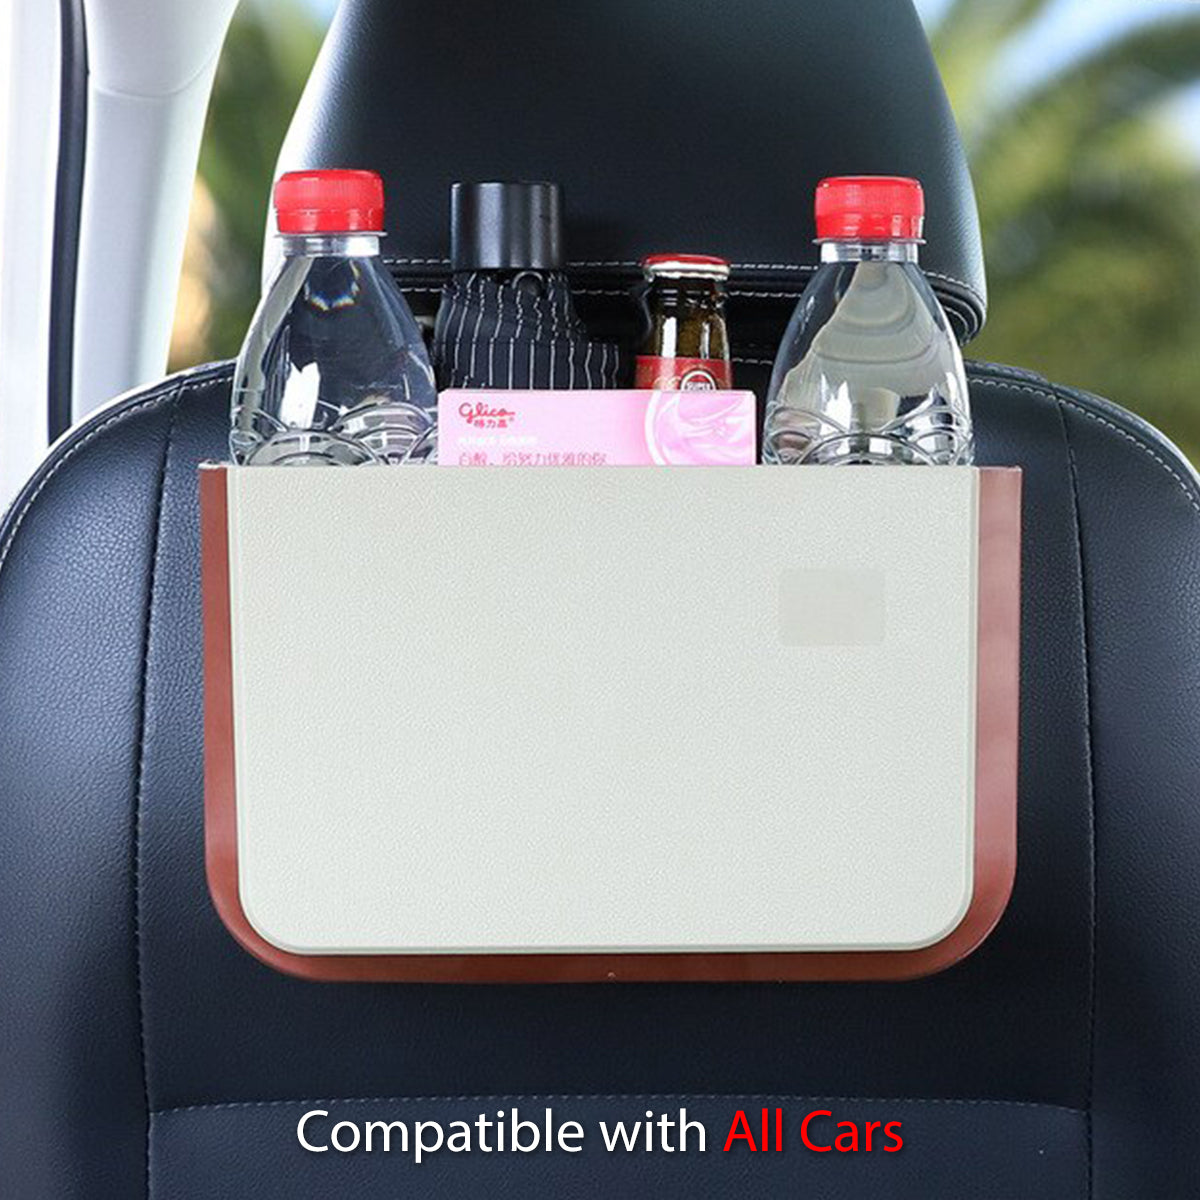 Hanging Waterproof Car Trash can-Foldable, Custom For Your Cars, Waterproof, and Equipped with Cup Holders and Trays. Multi-Purpose, Car Accessories JE11992 - Delicate Leather